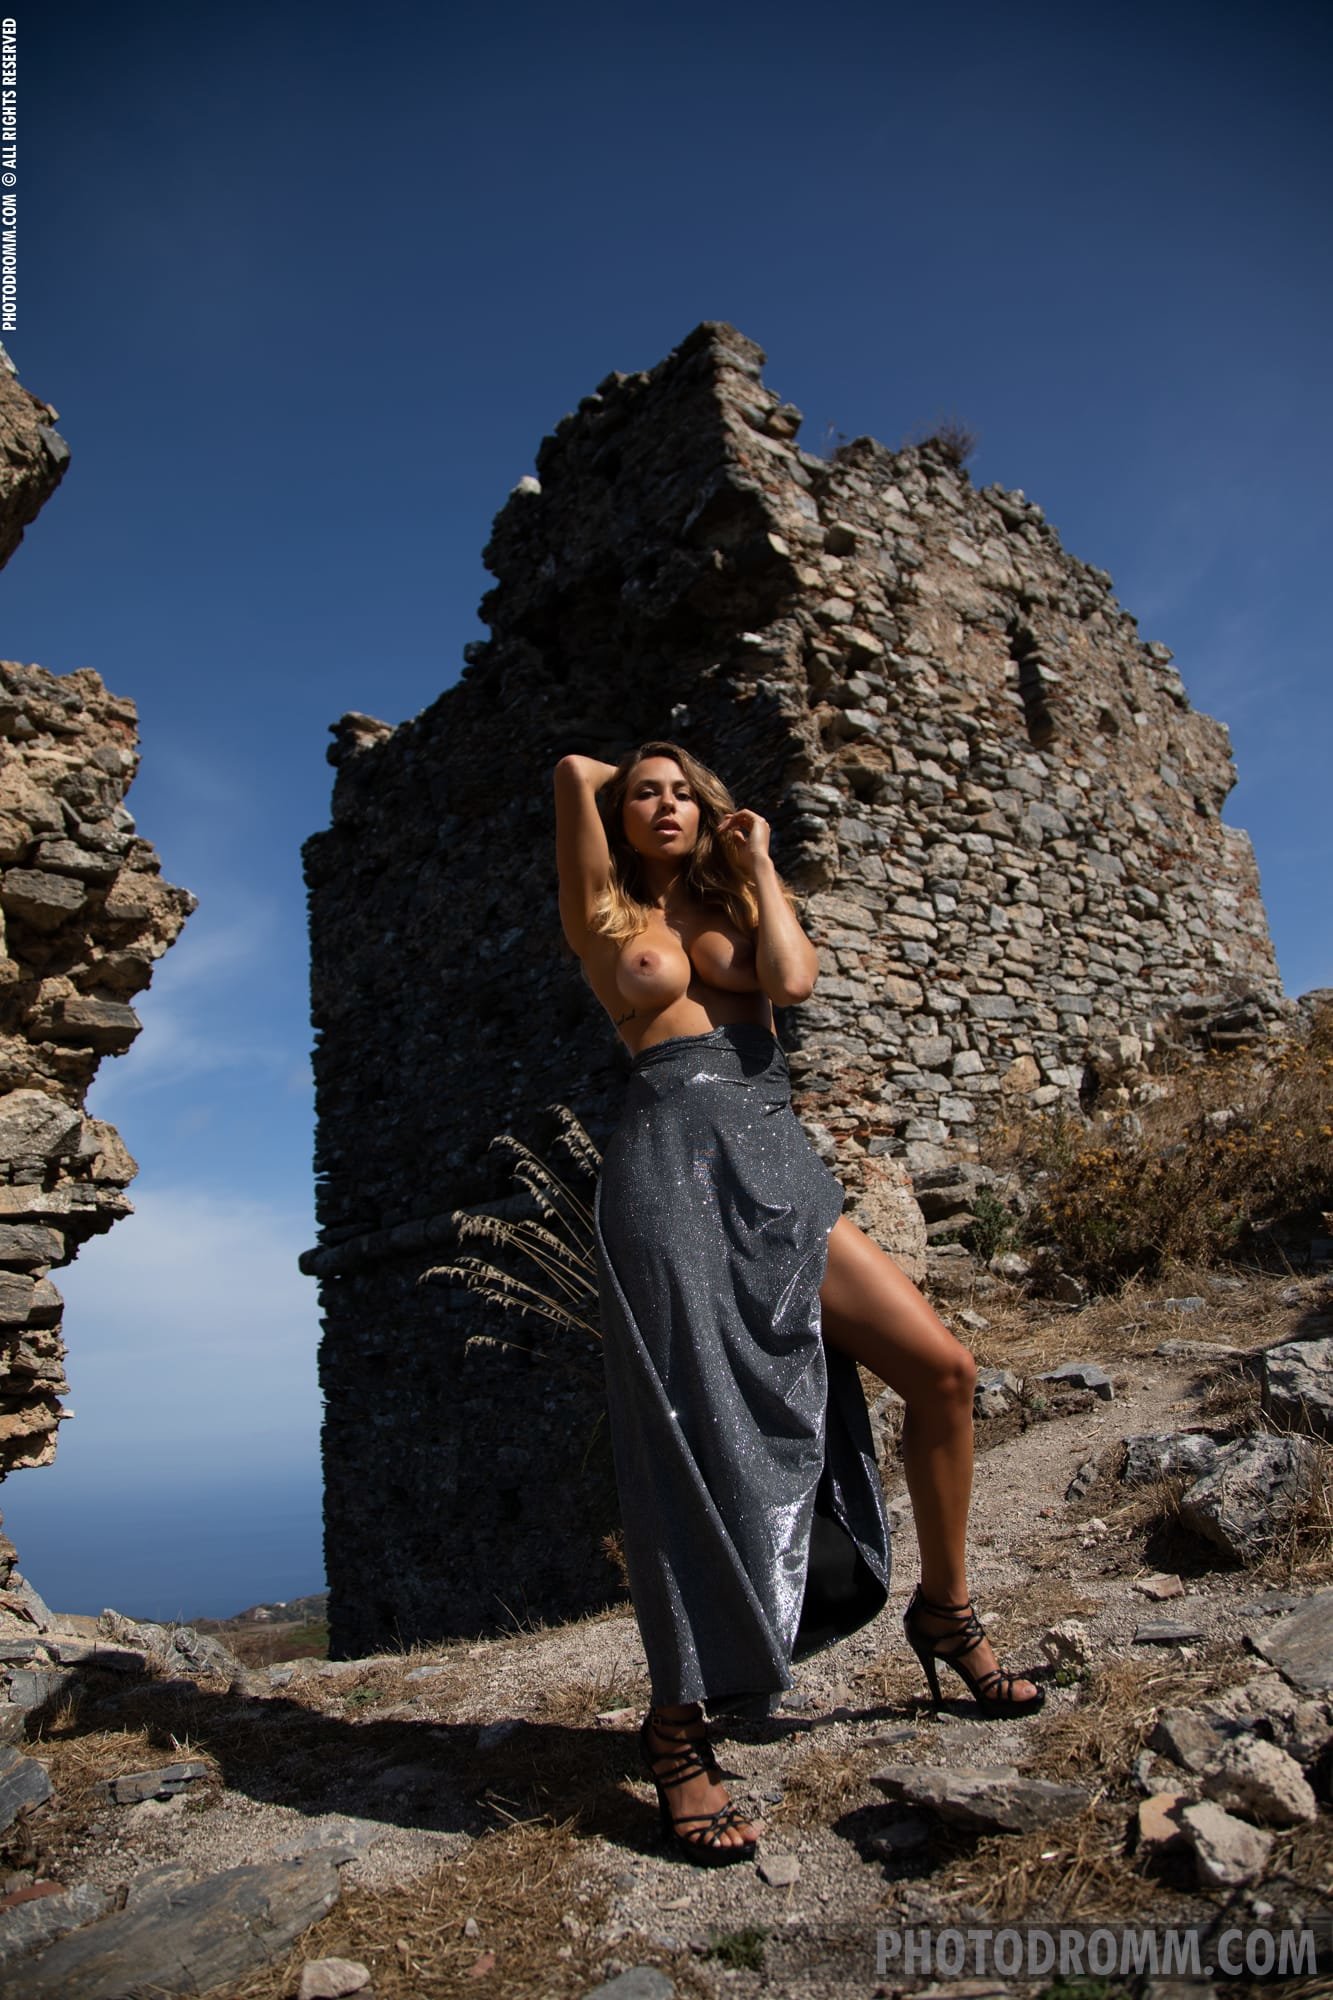 Gorgeous Goldie slips out of her evening dress and poses at an ancient ruin